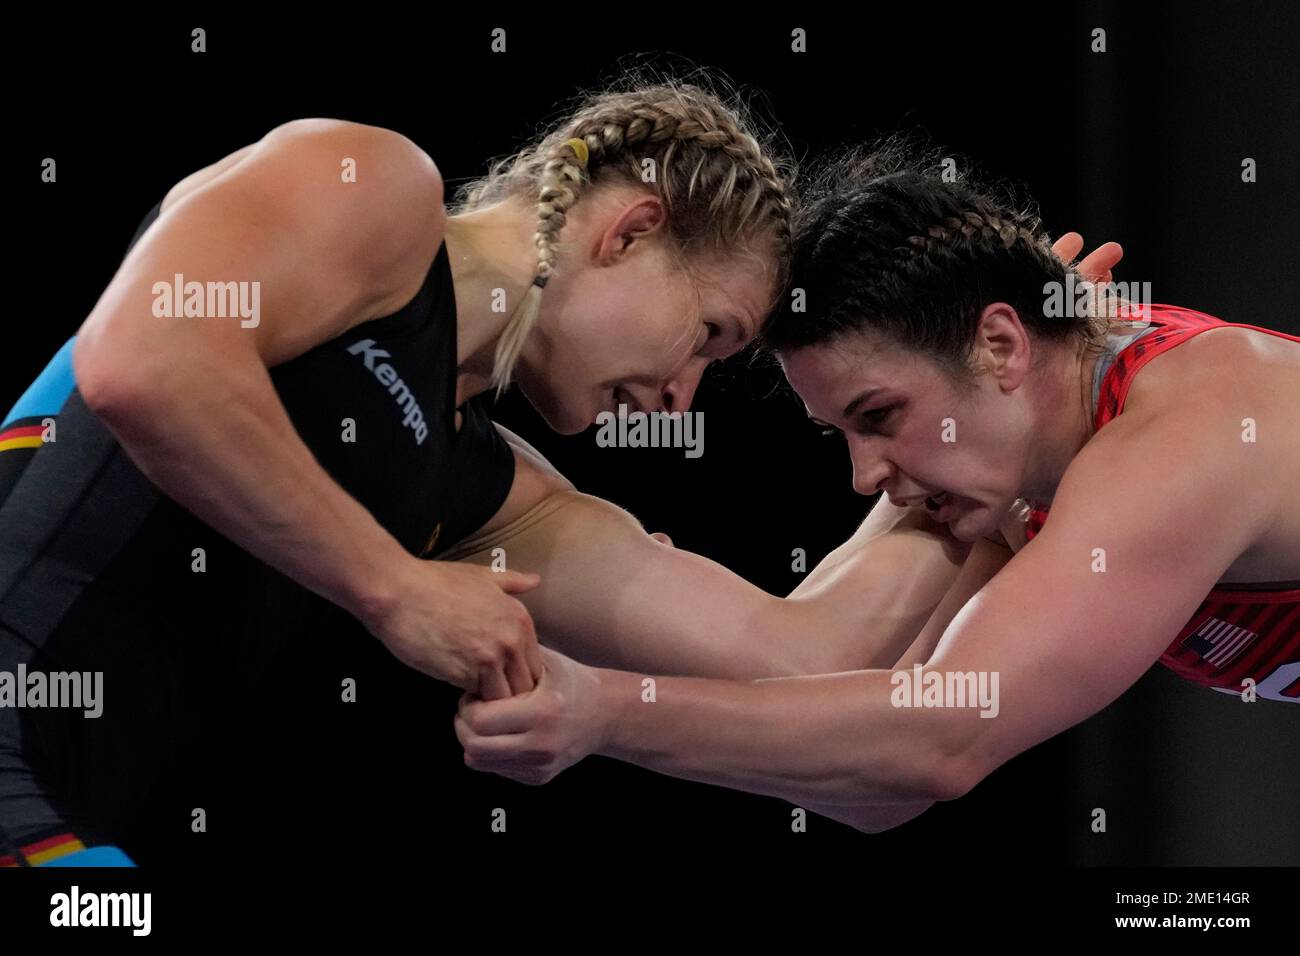 United States Adeline Maria Gray, right, and Germanys Aline Rotter Focken compete during the womens 76kg freestyle wrestling final match at the 2020 Summer Olympics, Monday, Aug